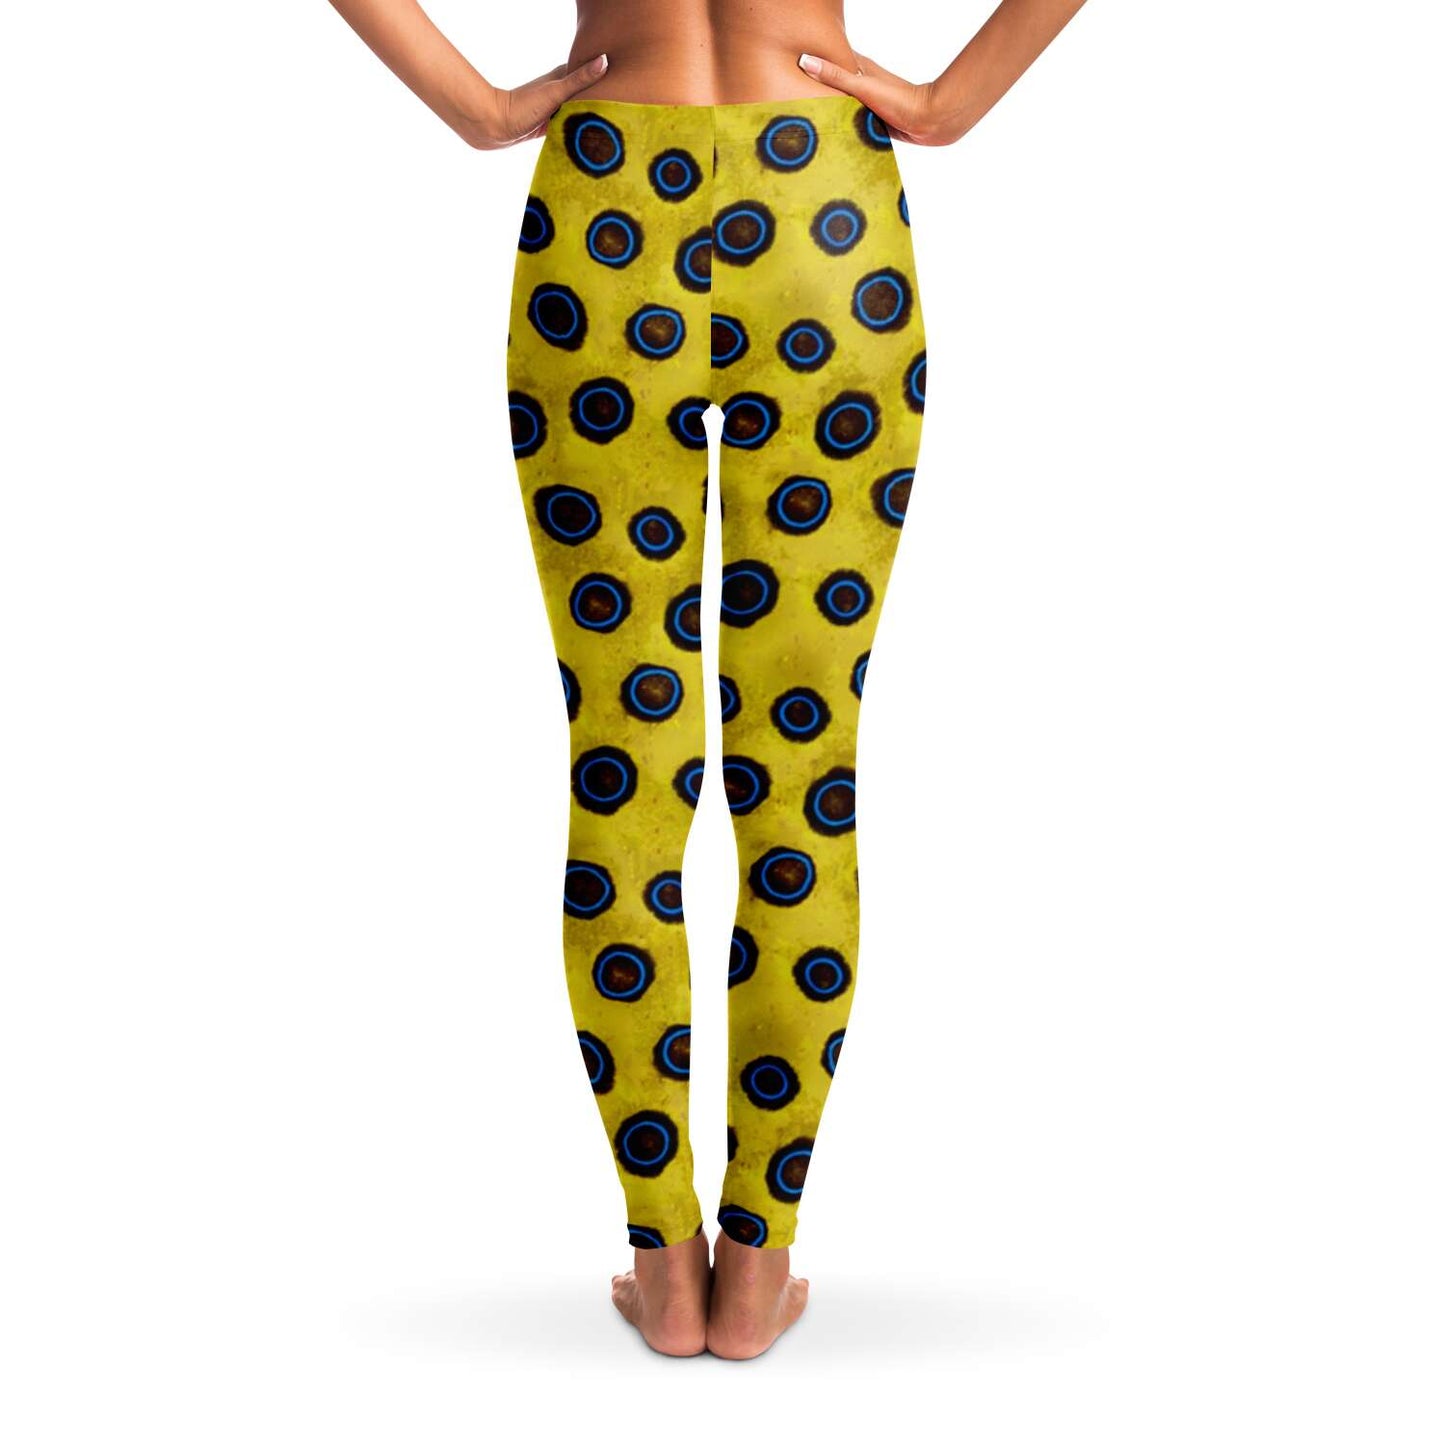 Back view on model of blue-ringed octopus leggings for scuba diving, yoga and running